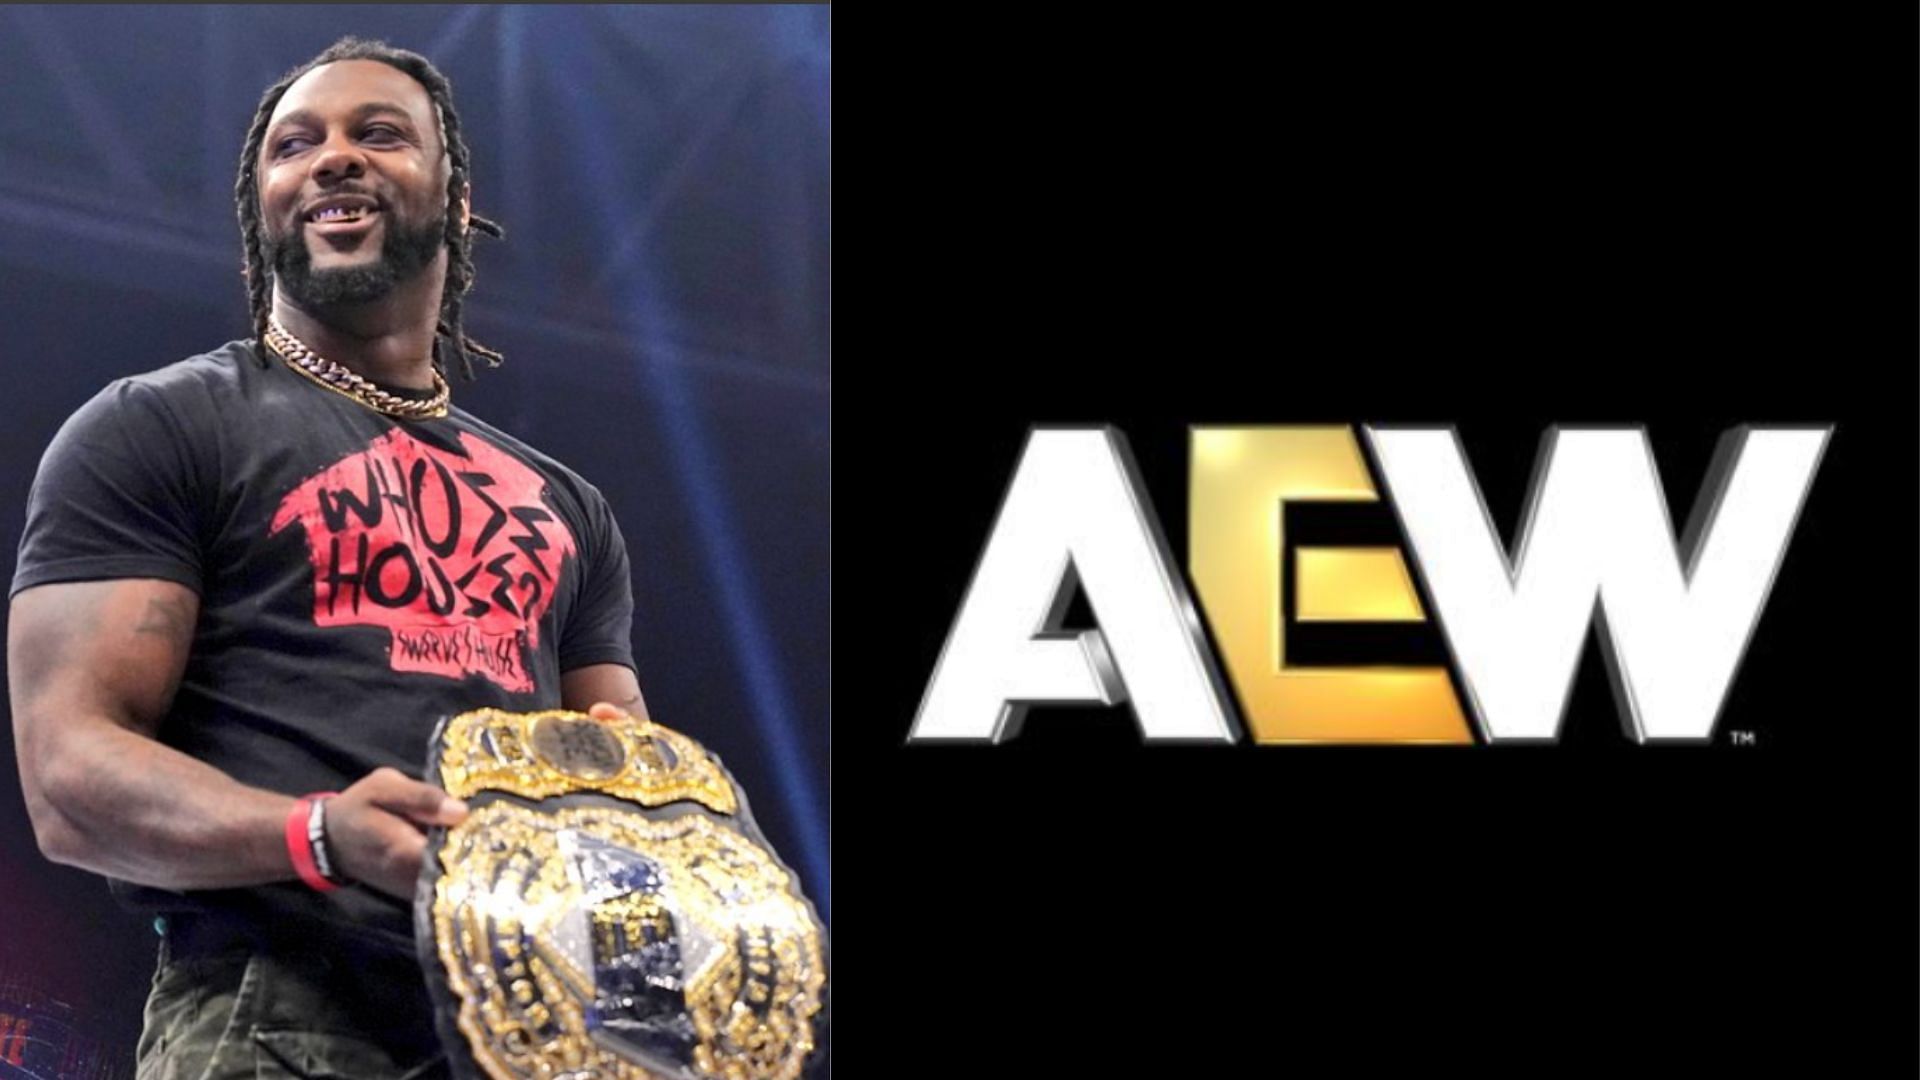 Swerve Strickland beat Samoa Joe to win the AEW World Title [Image Credits: AEW and Strickland